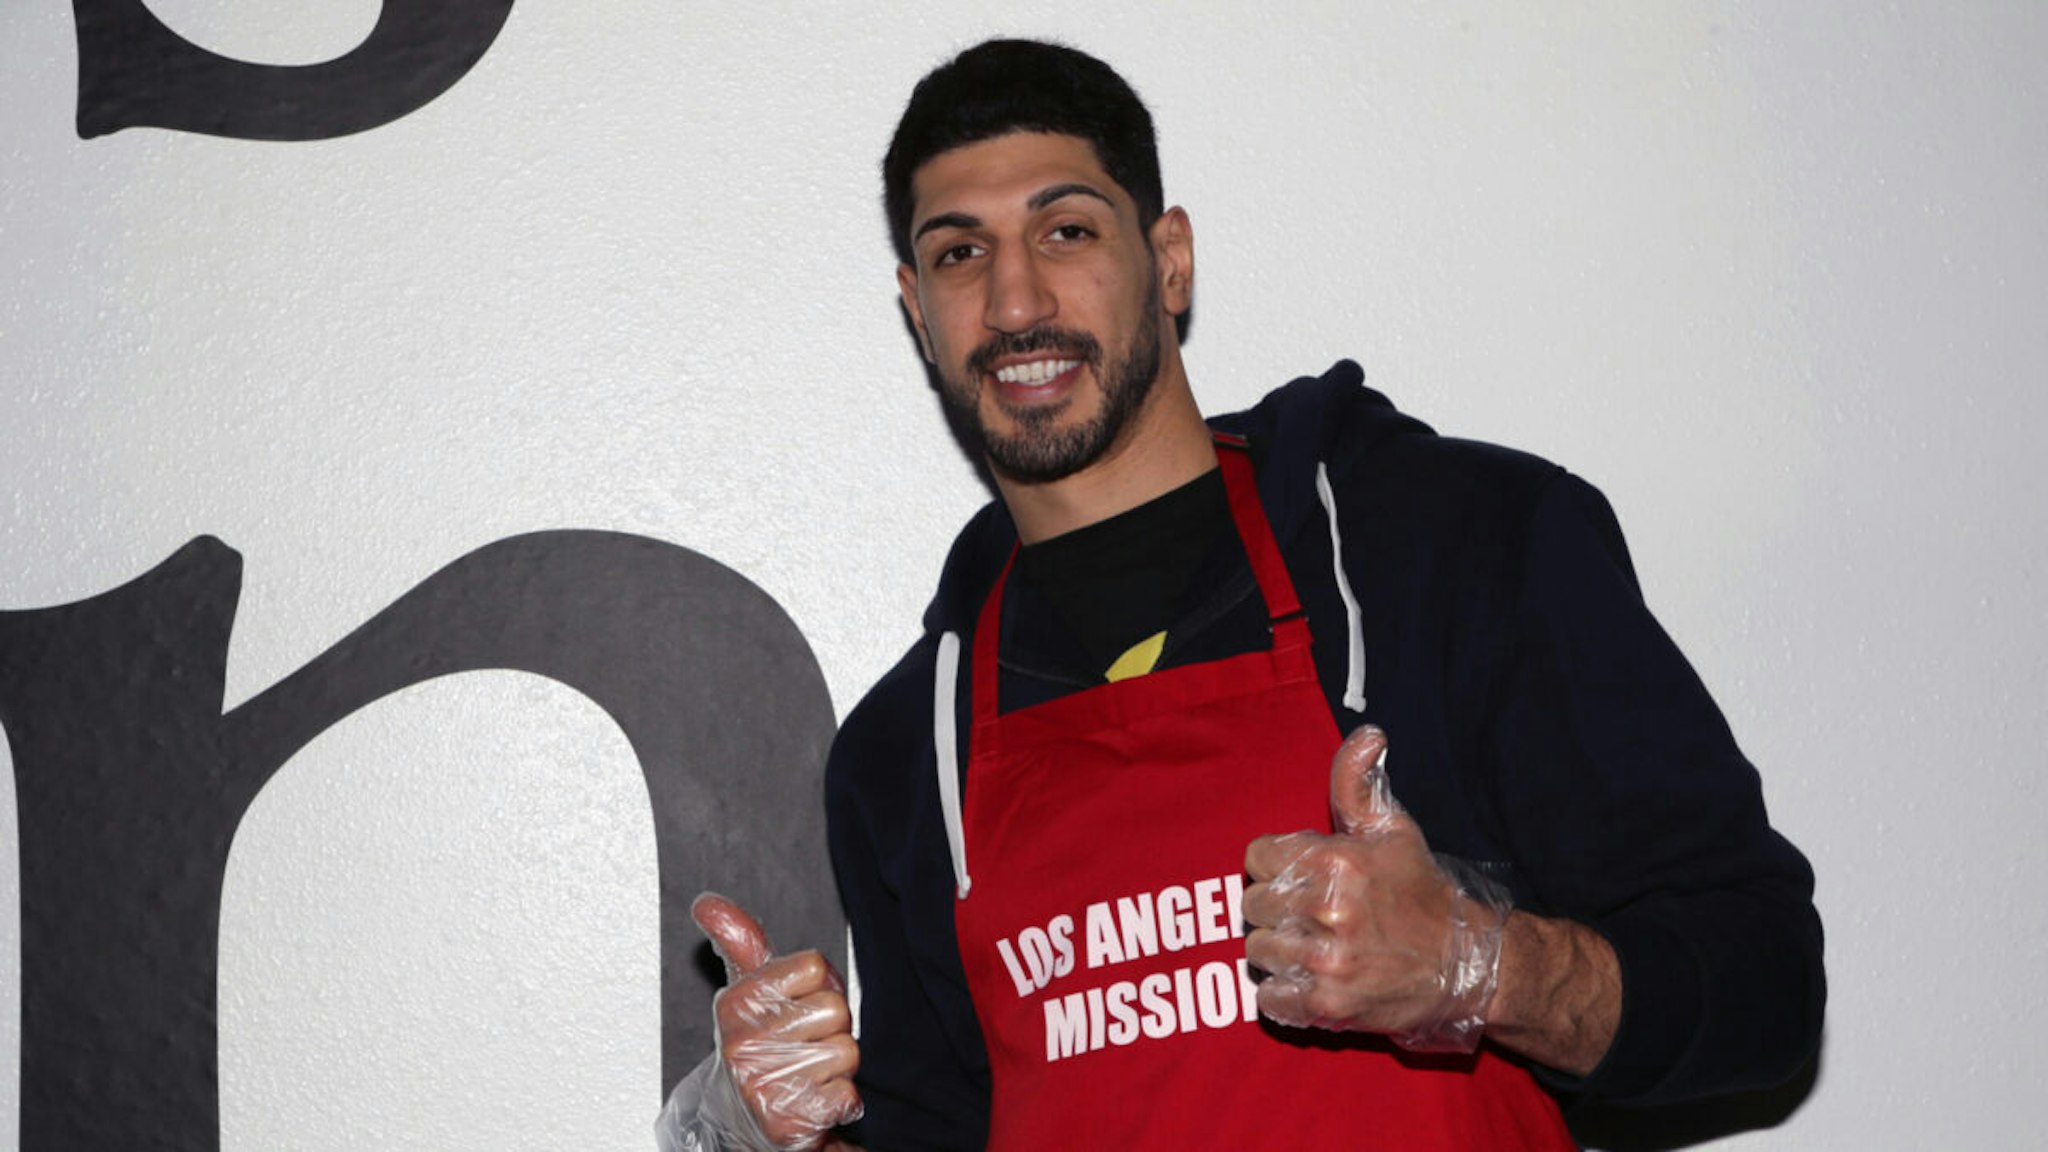 Boston Celtic and political activist Enes Kanter Freedom purchases and distributes 1000 meals from Plant Culture Cafe for the homeless at Los Angeles Mission on December 08, 2021 in Los Angeles, California.